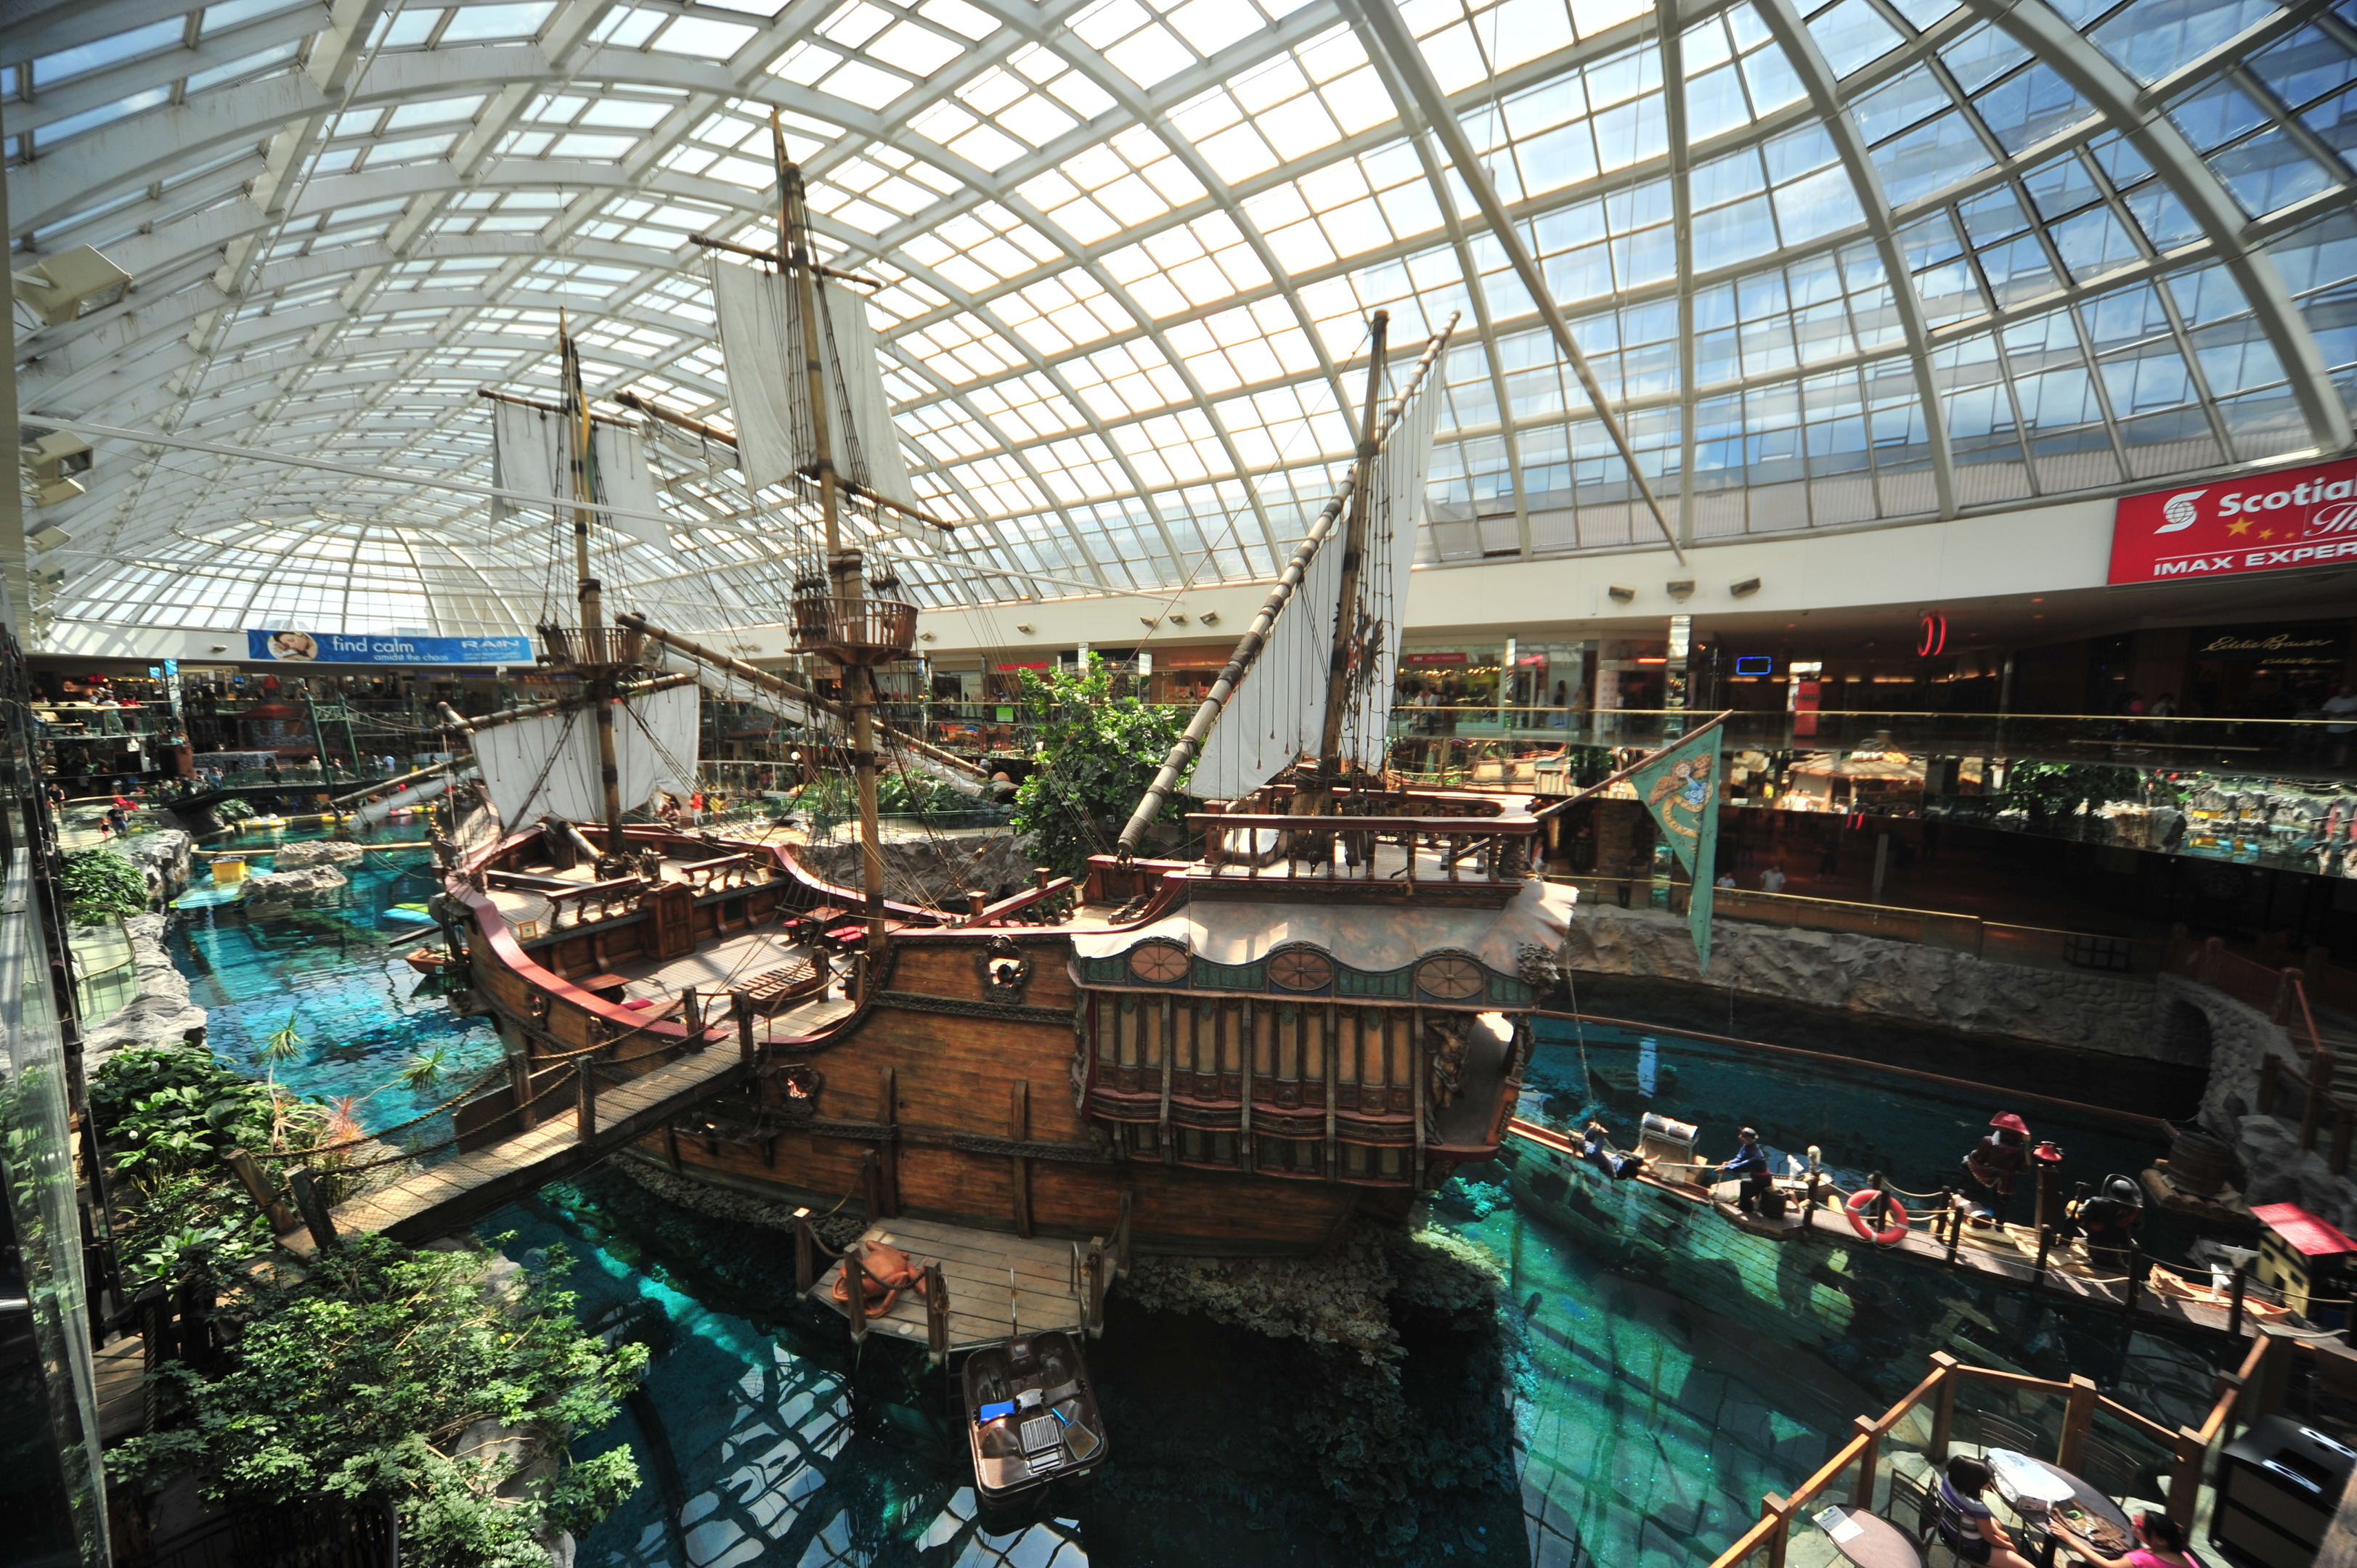 10 of the world's largest, most jawdropping shopping malls The